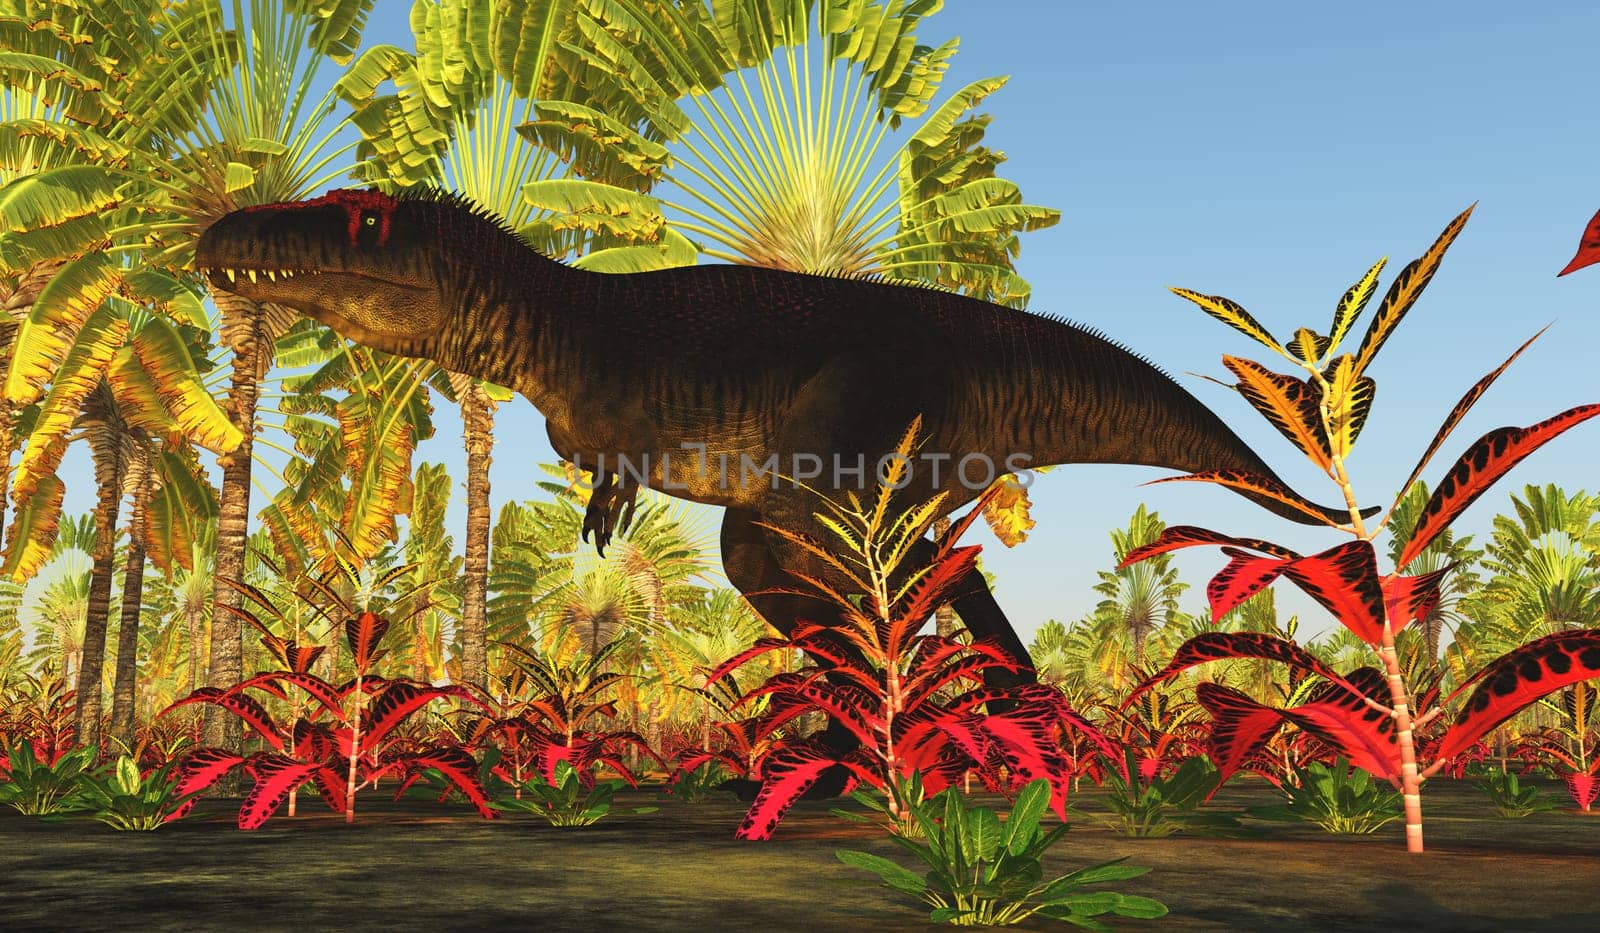 Tyrannotitan was a carnivorous theropod dinosaur that lived in Argentina during the Cretaceous Period.